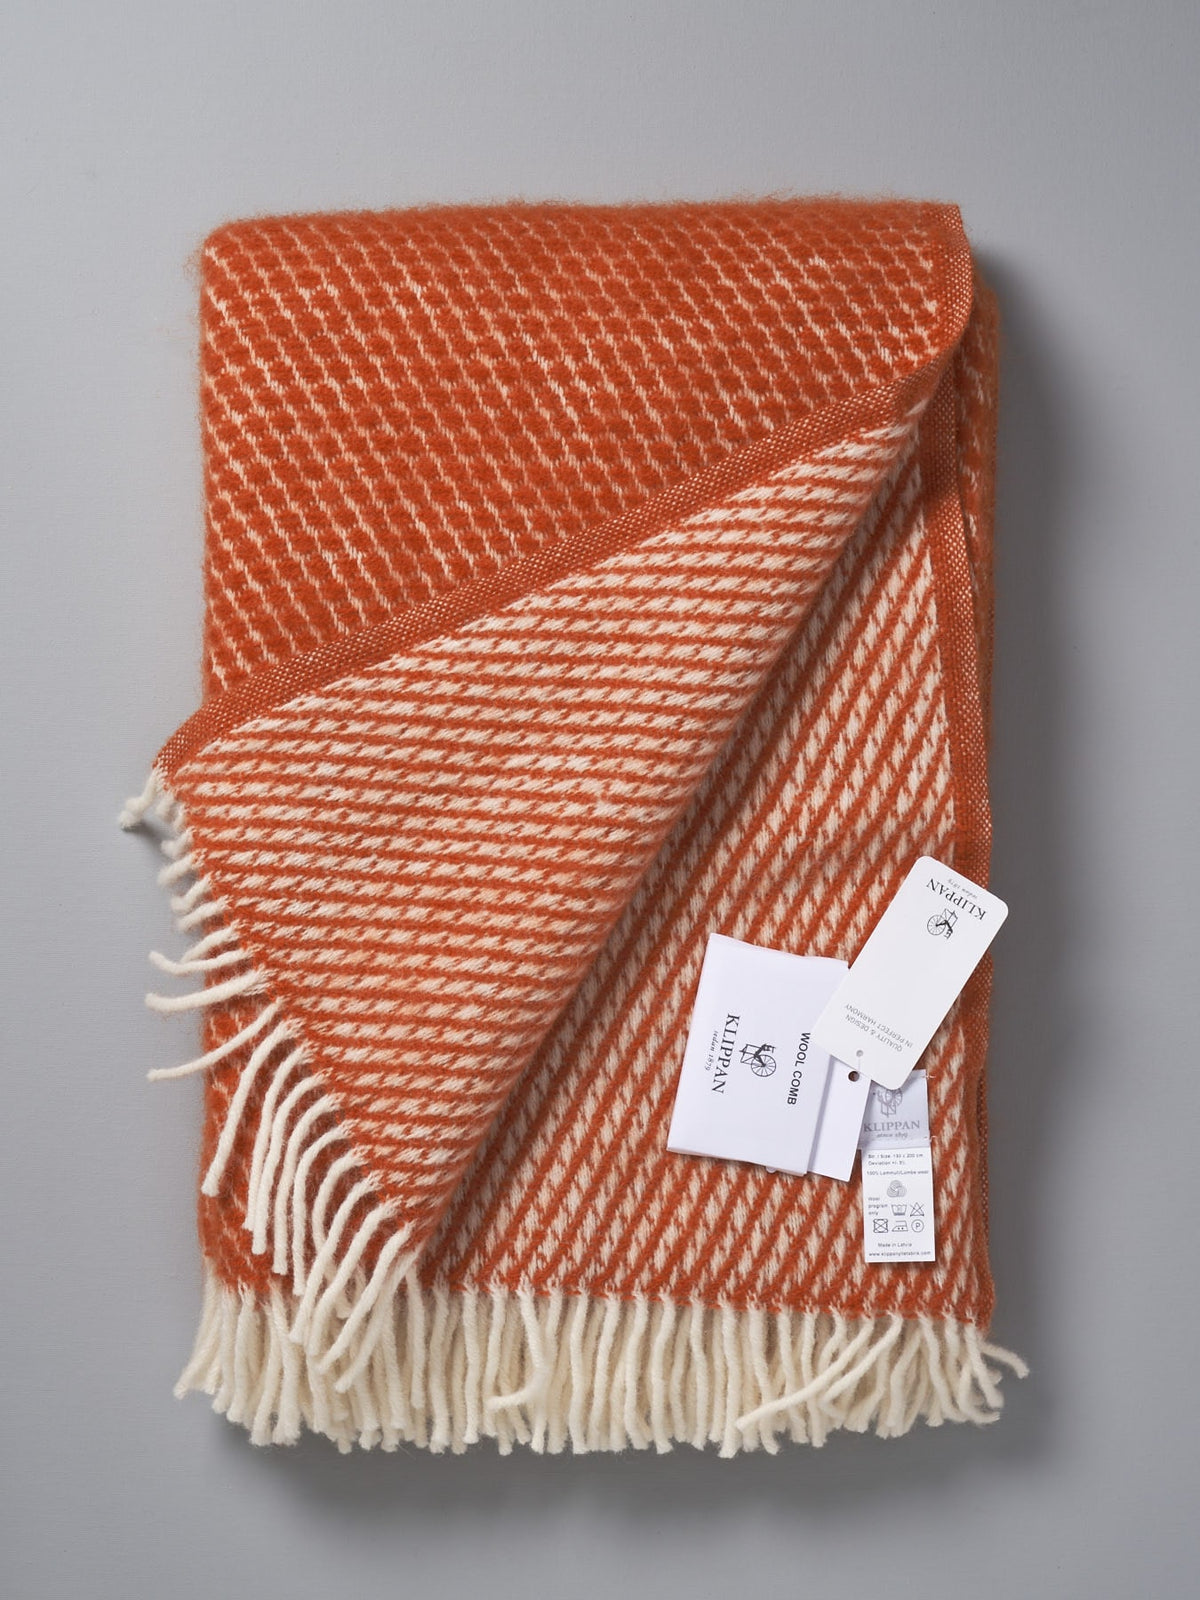 A Honeycomb ECO* Lambswool Throw – Rust by Klippan on a grey background.